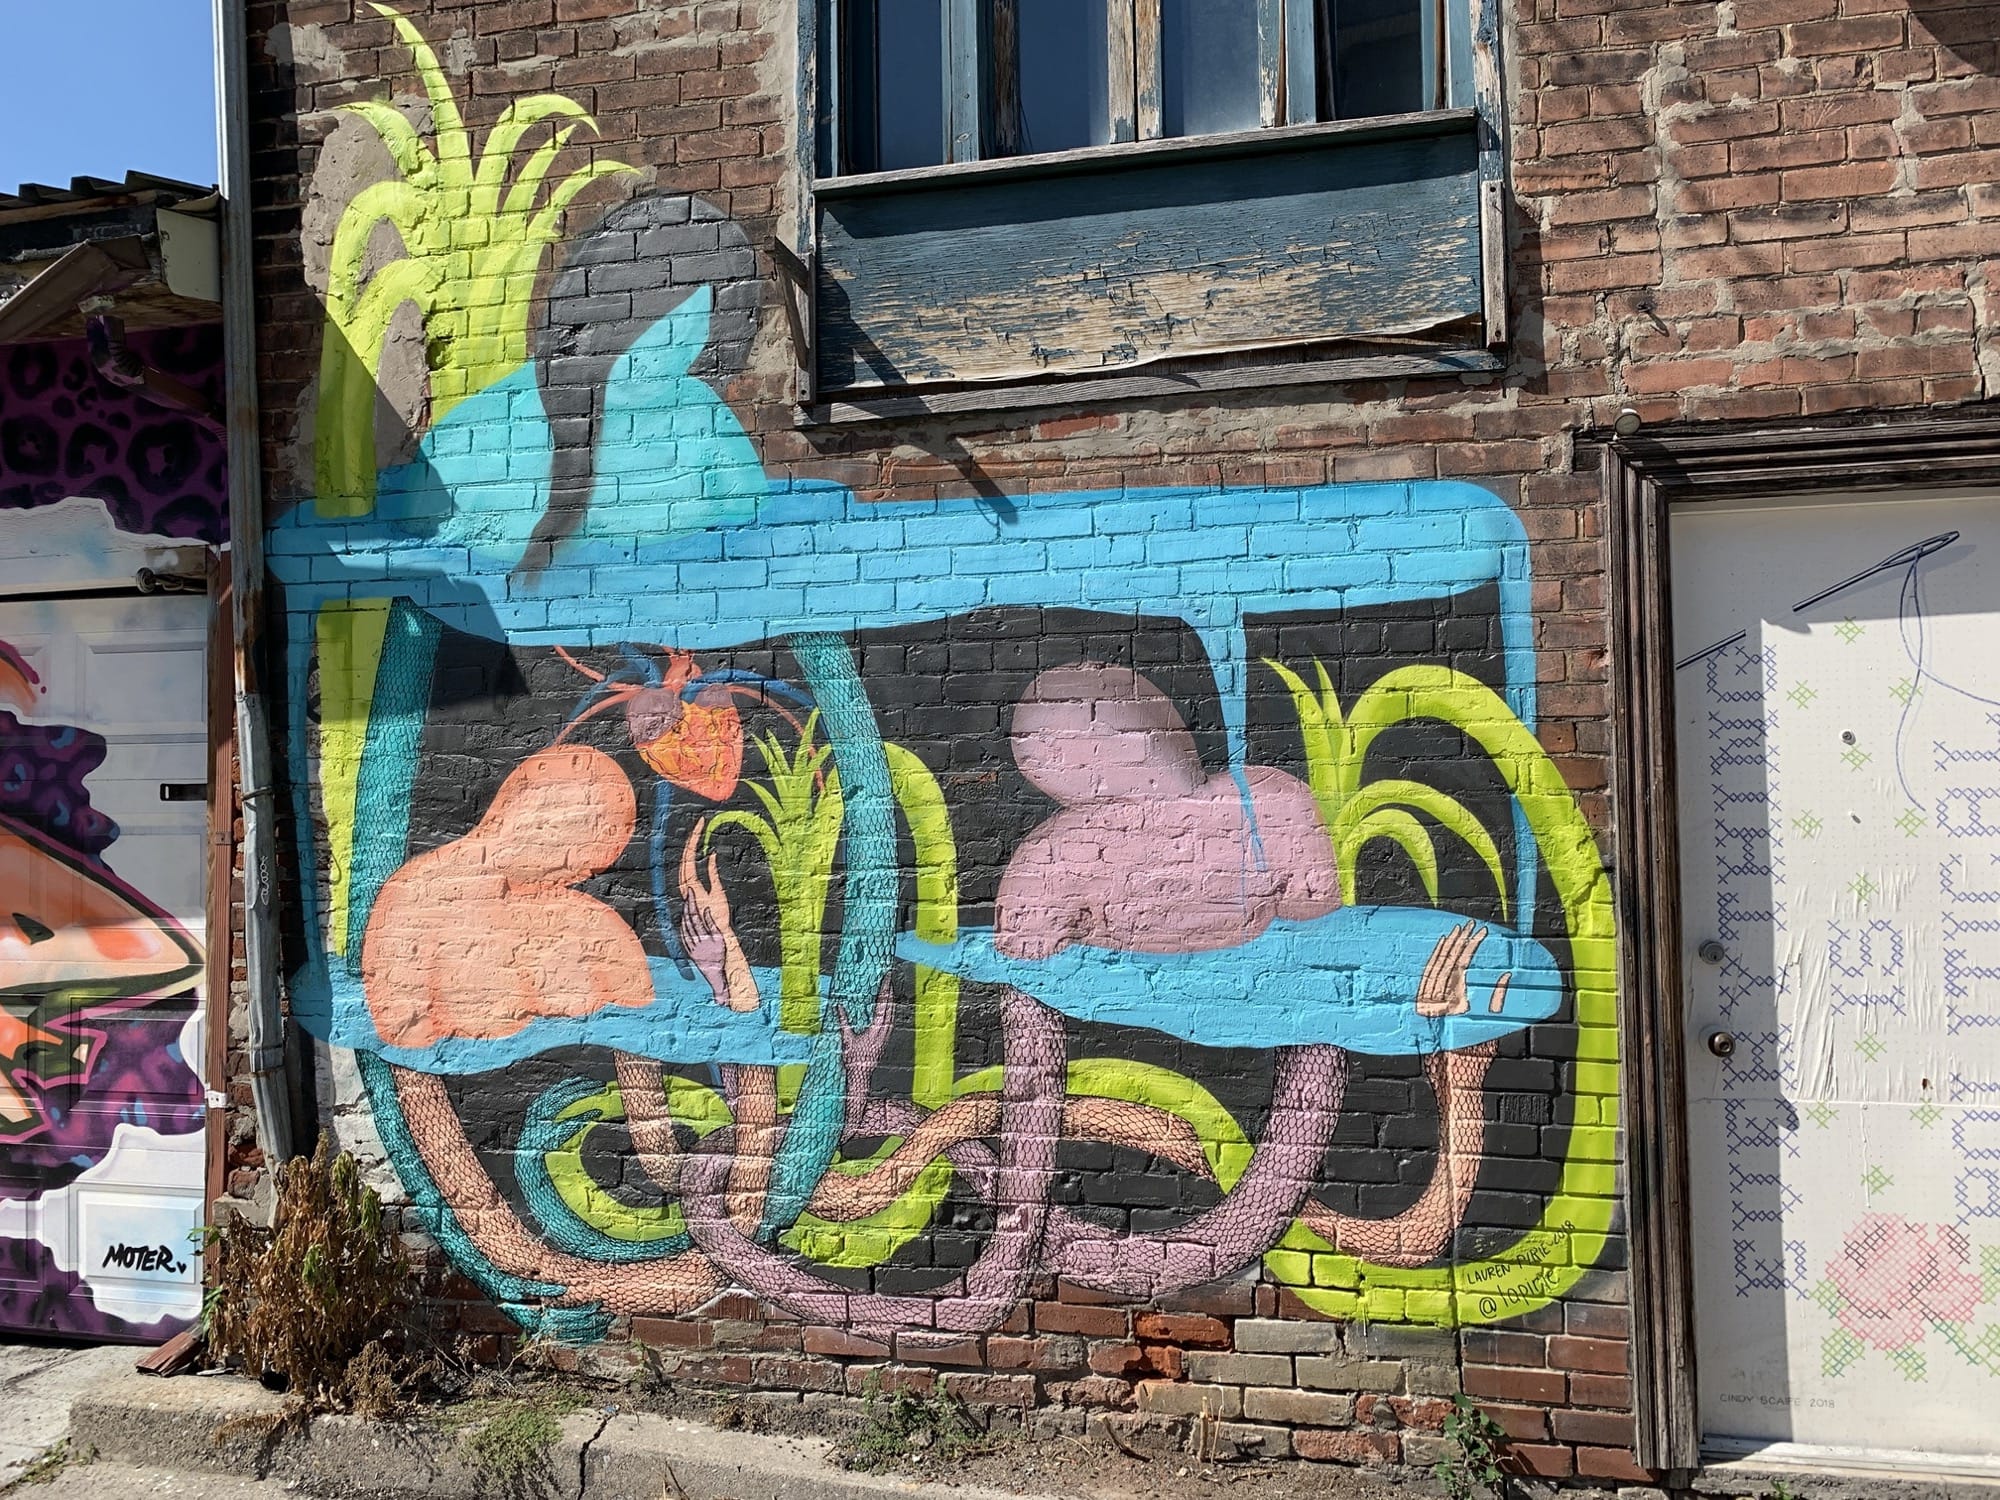 Graffiti 2346  captured by Rabot in Toronto Canada